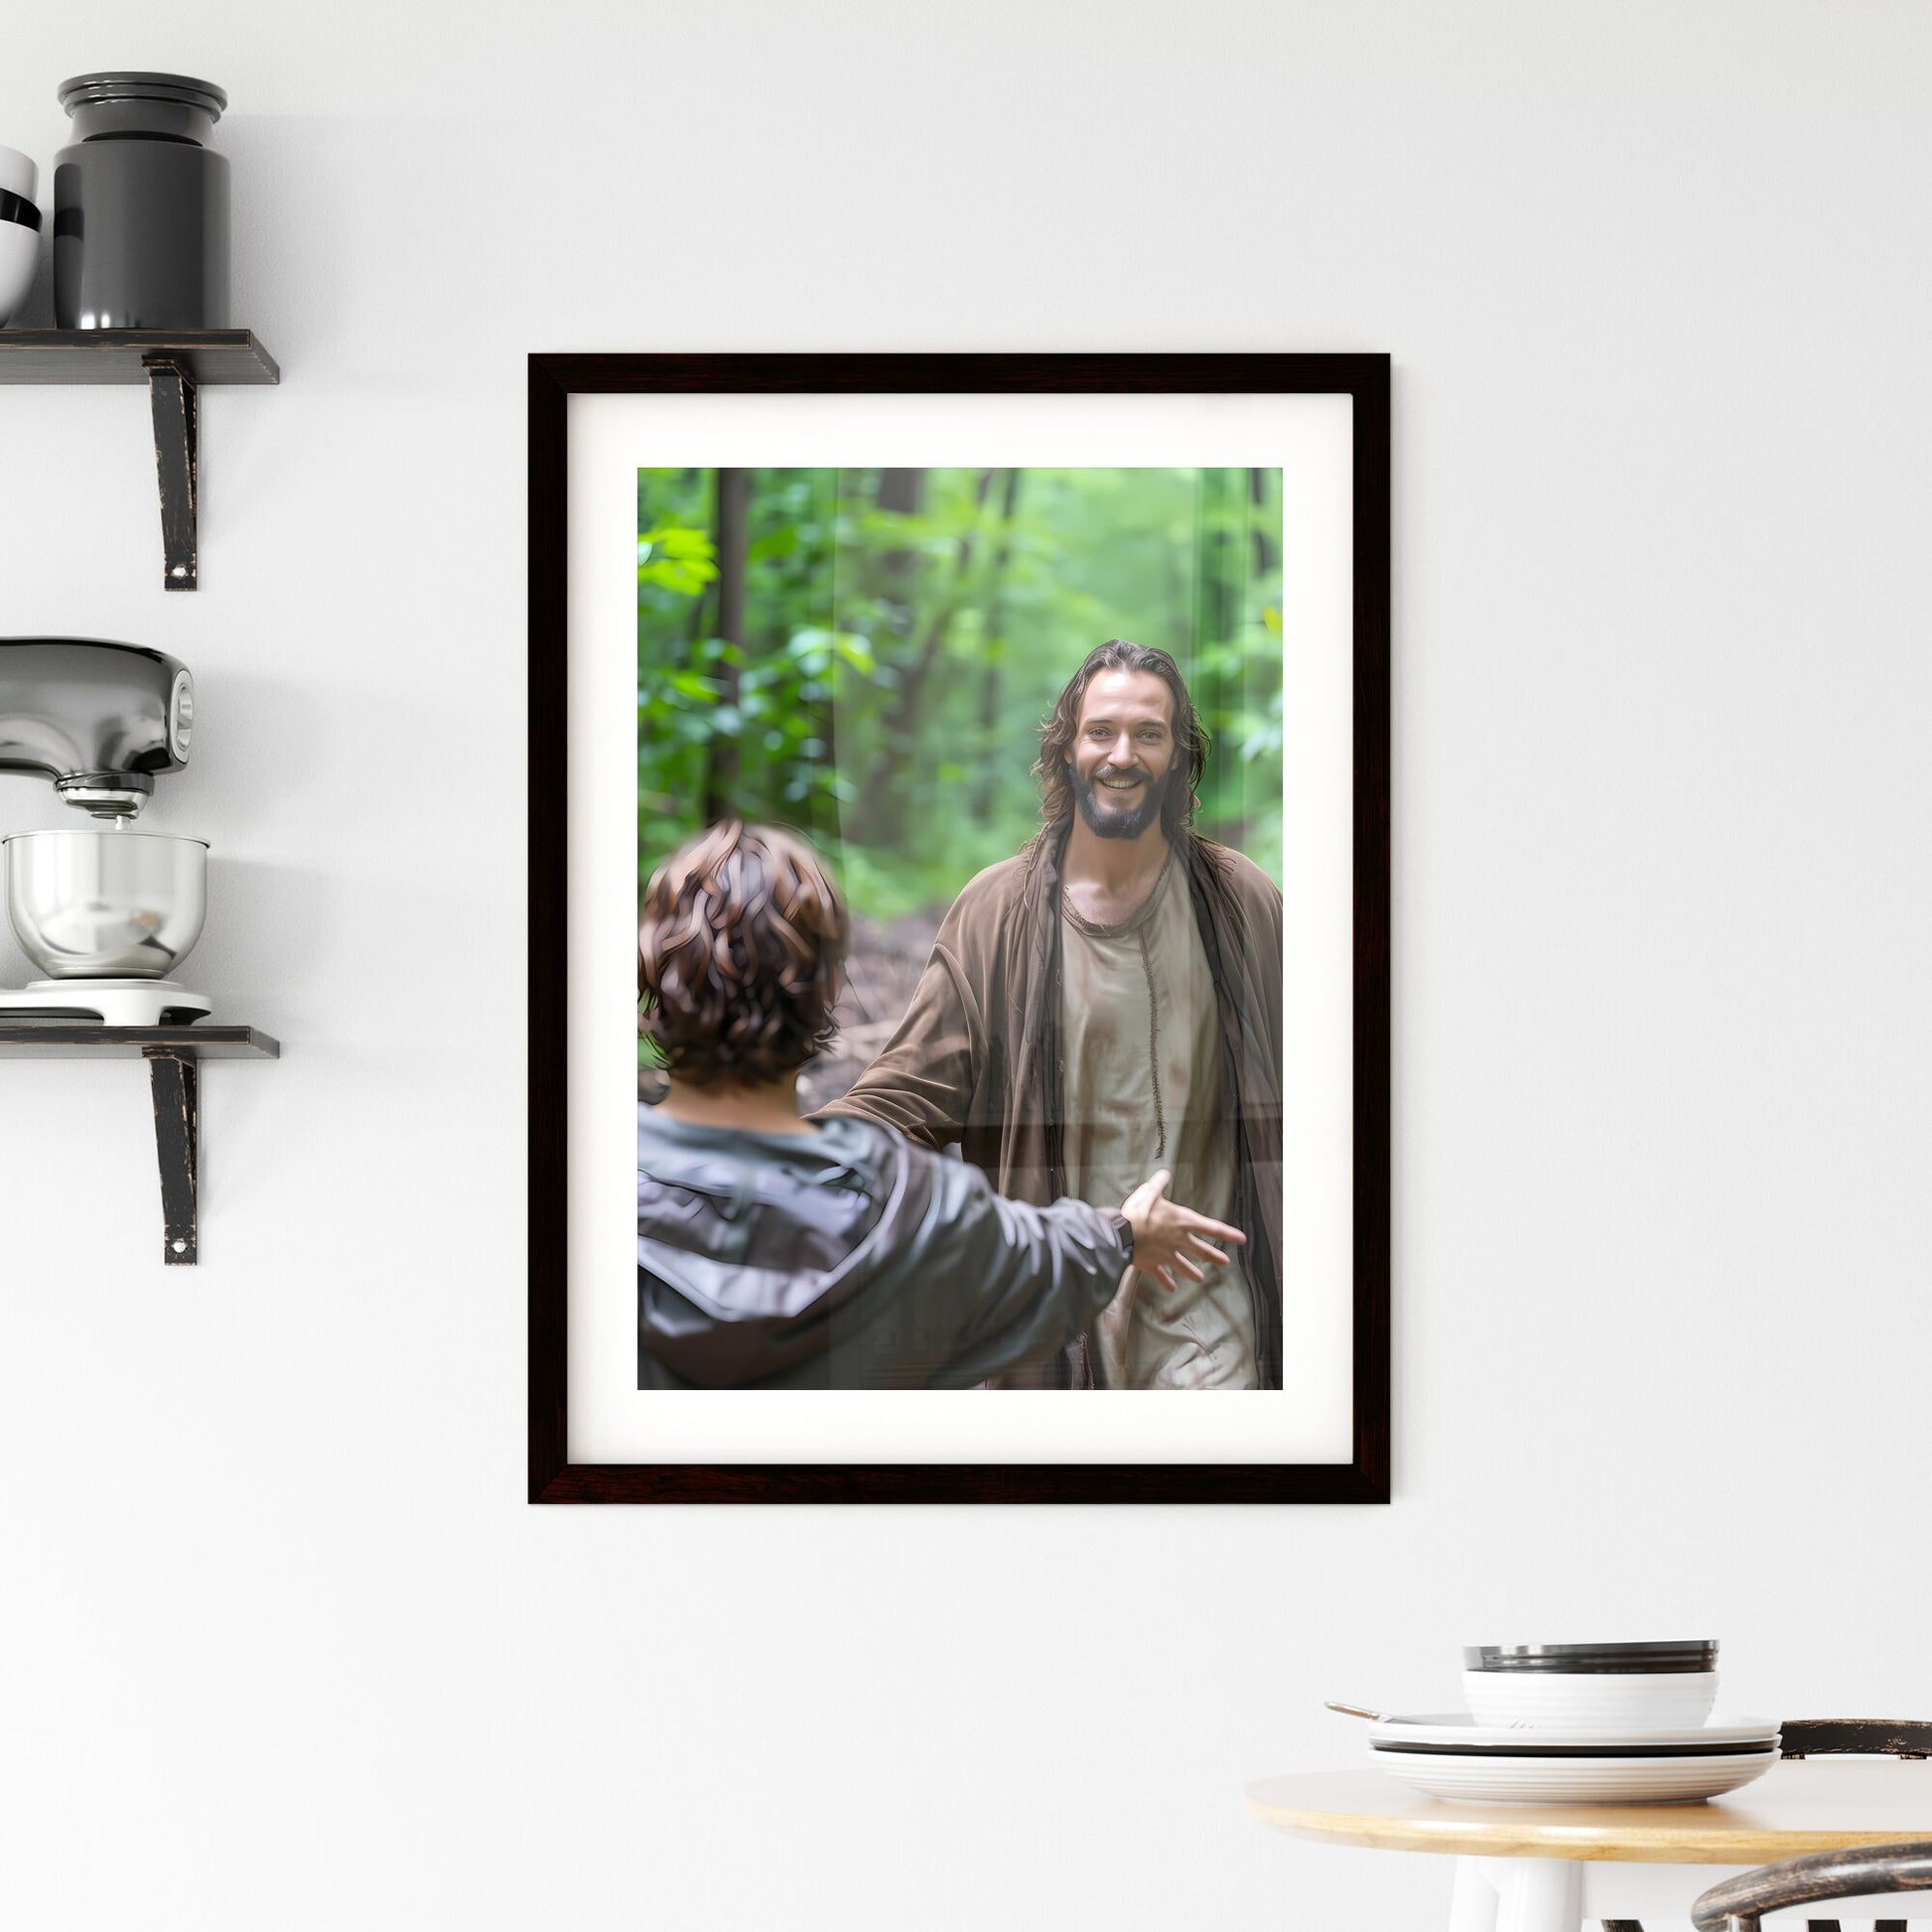 We see the back of young woman with dark wavy hair wearing a brown dress is running toward Jesus a man with dark long hair and a brown rugged robe - Art print of a man in a robe talking to a person in the woods Default Title